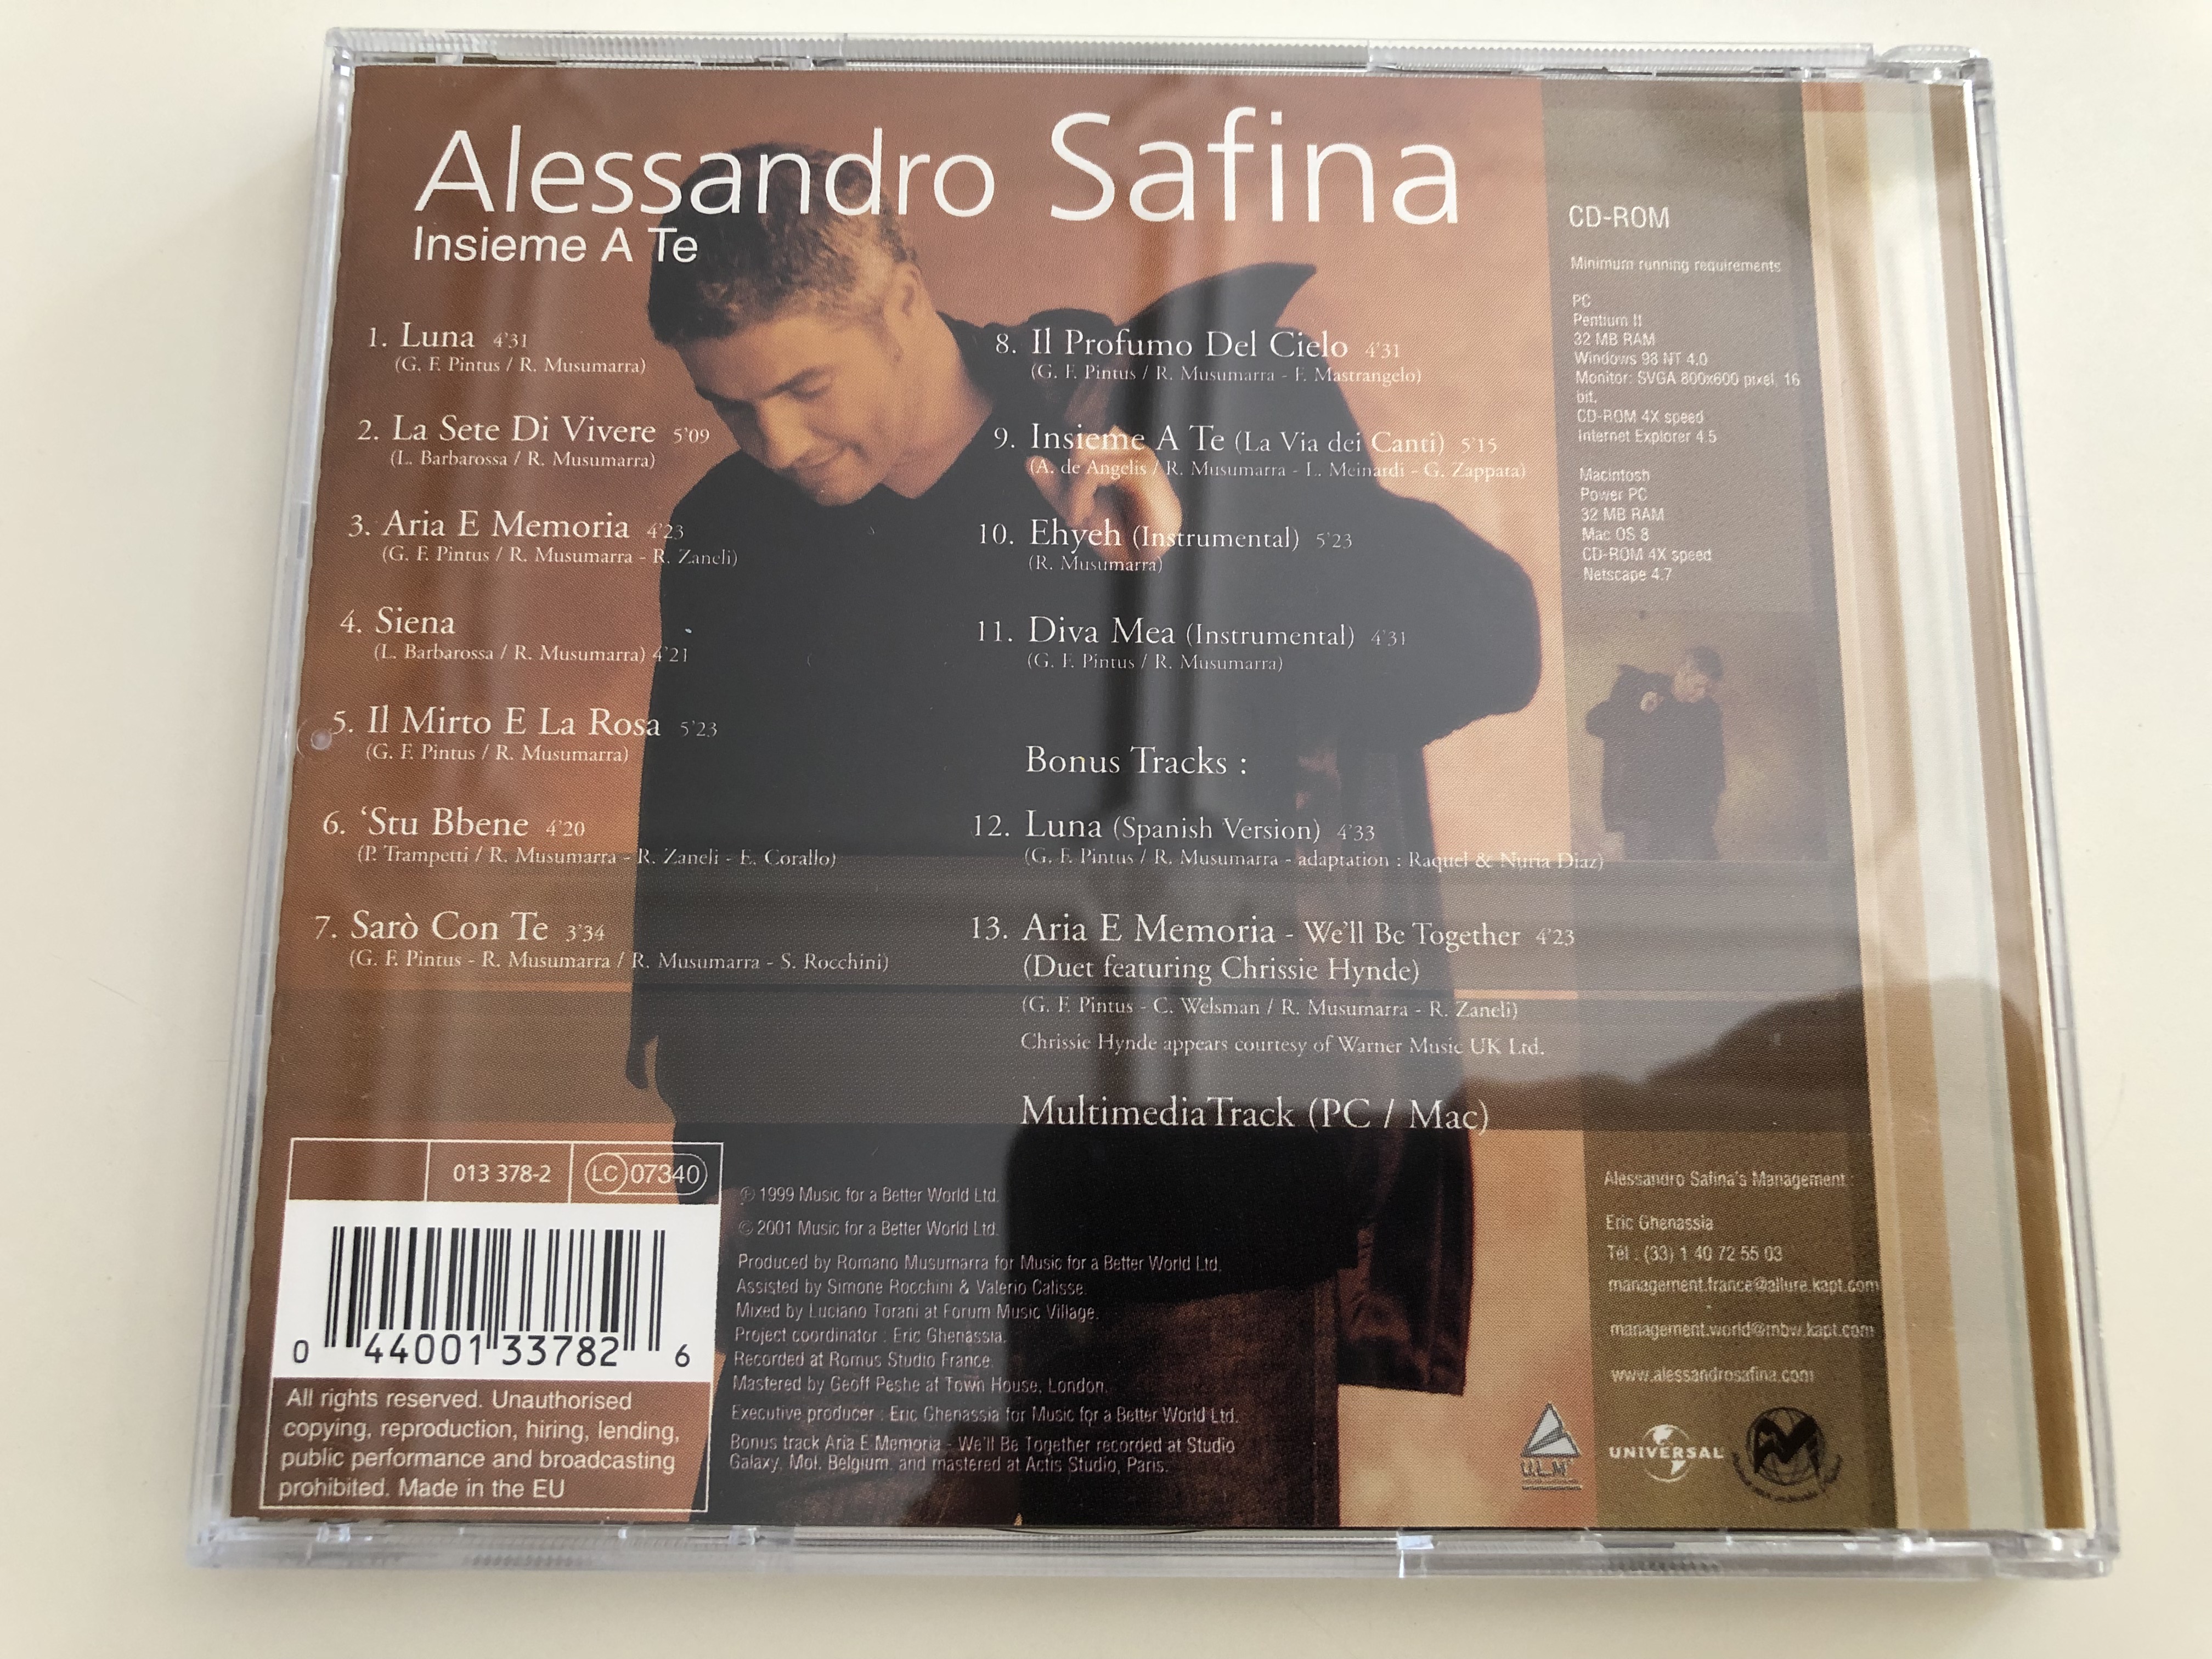 -alessandro-safina-insieme-a-te-strings-orchestra-di-roma-directed-by-romano-musumarra-audio-cd-2001-with-multimedio-track013-378-2-7-.jpg